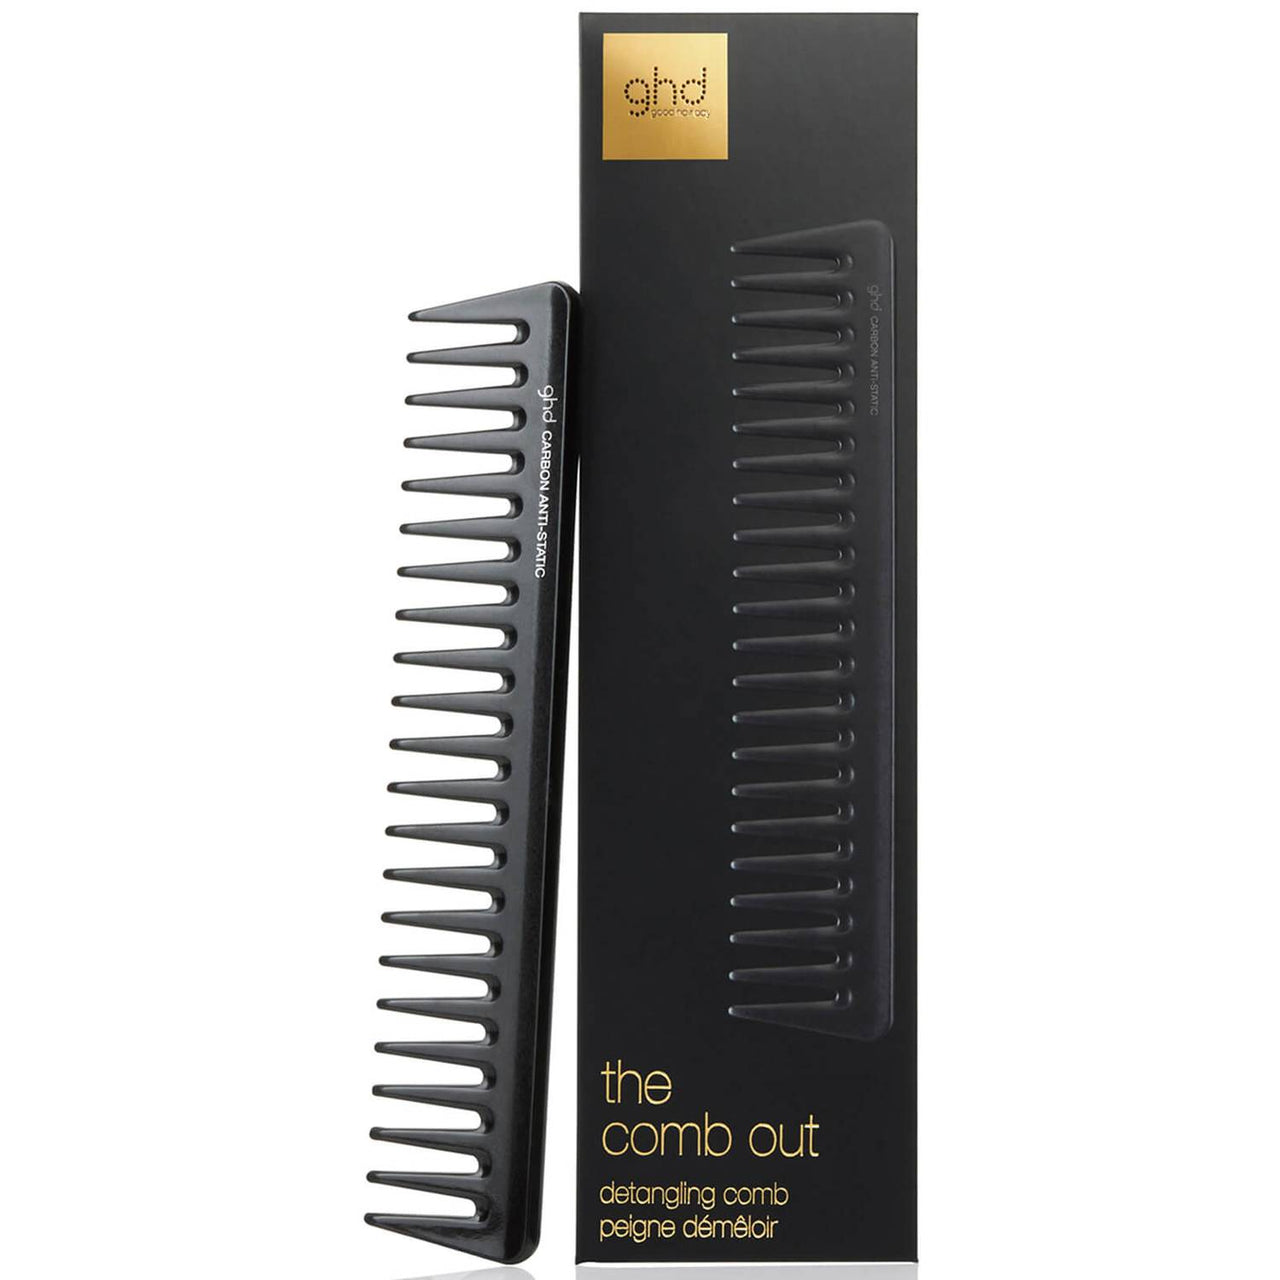 GHD The comb out Detangling Comb